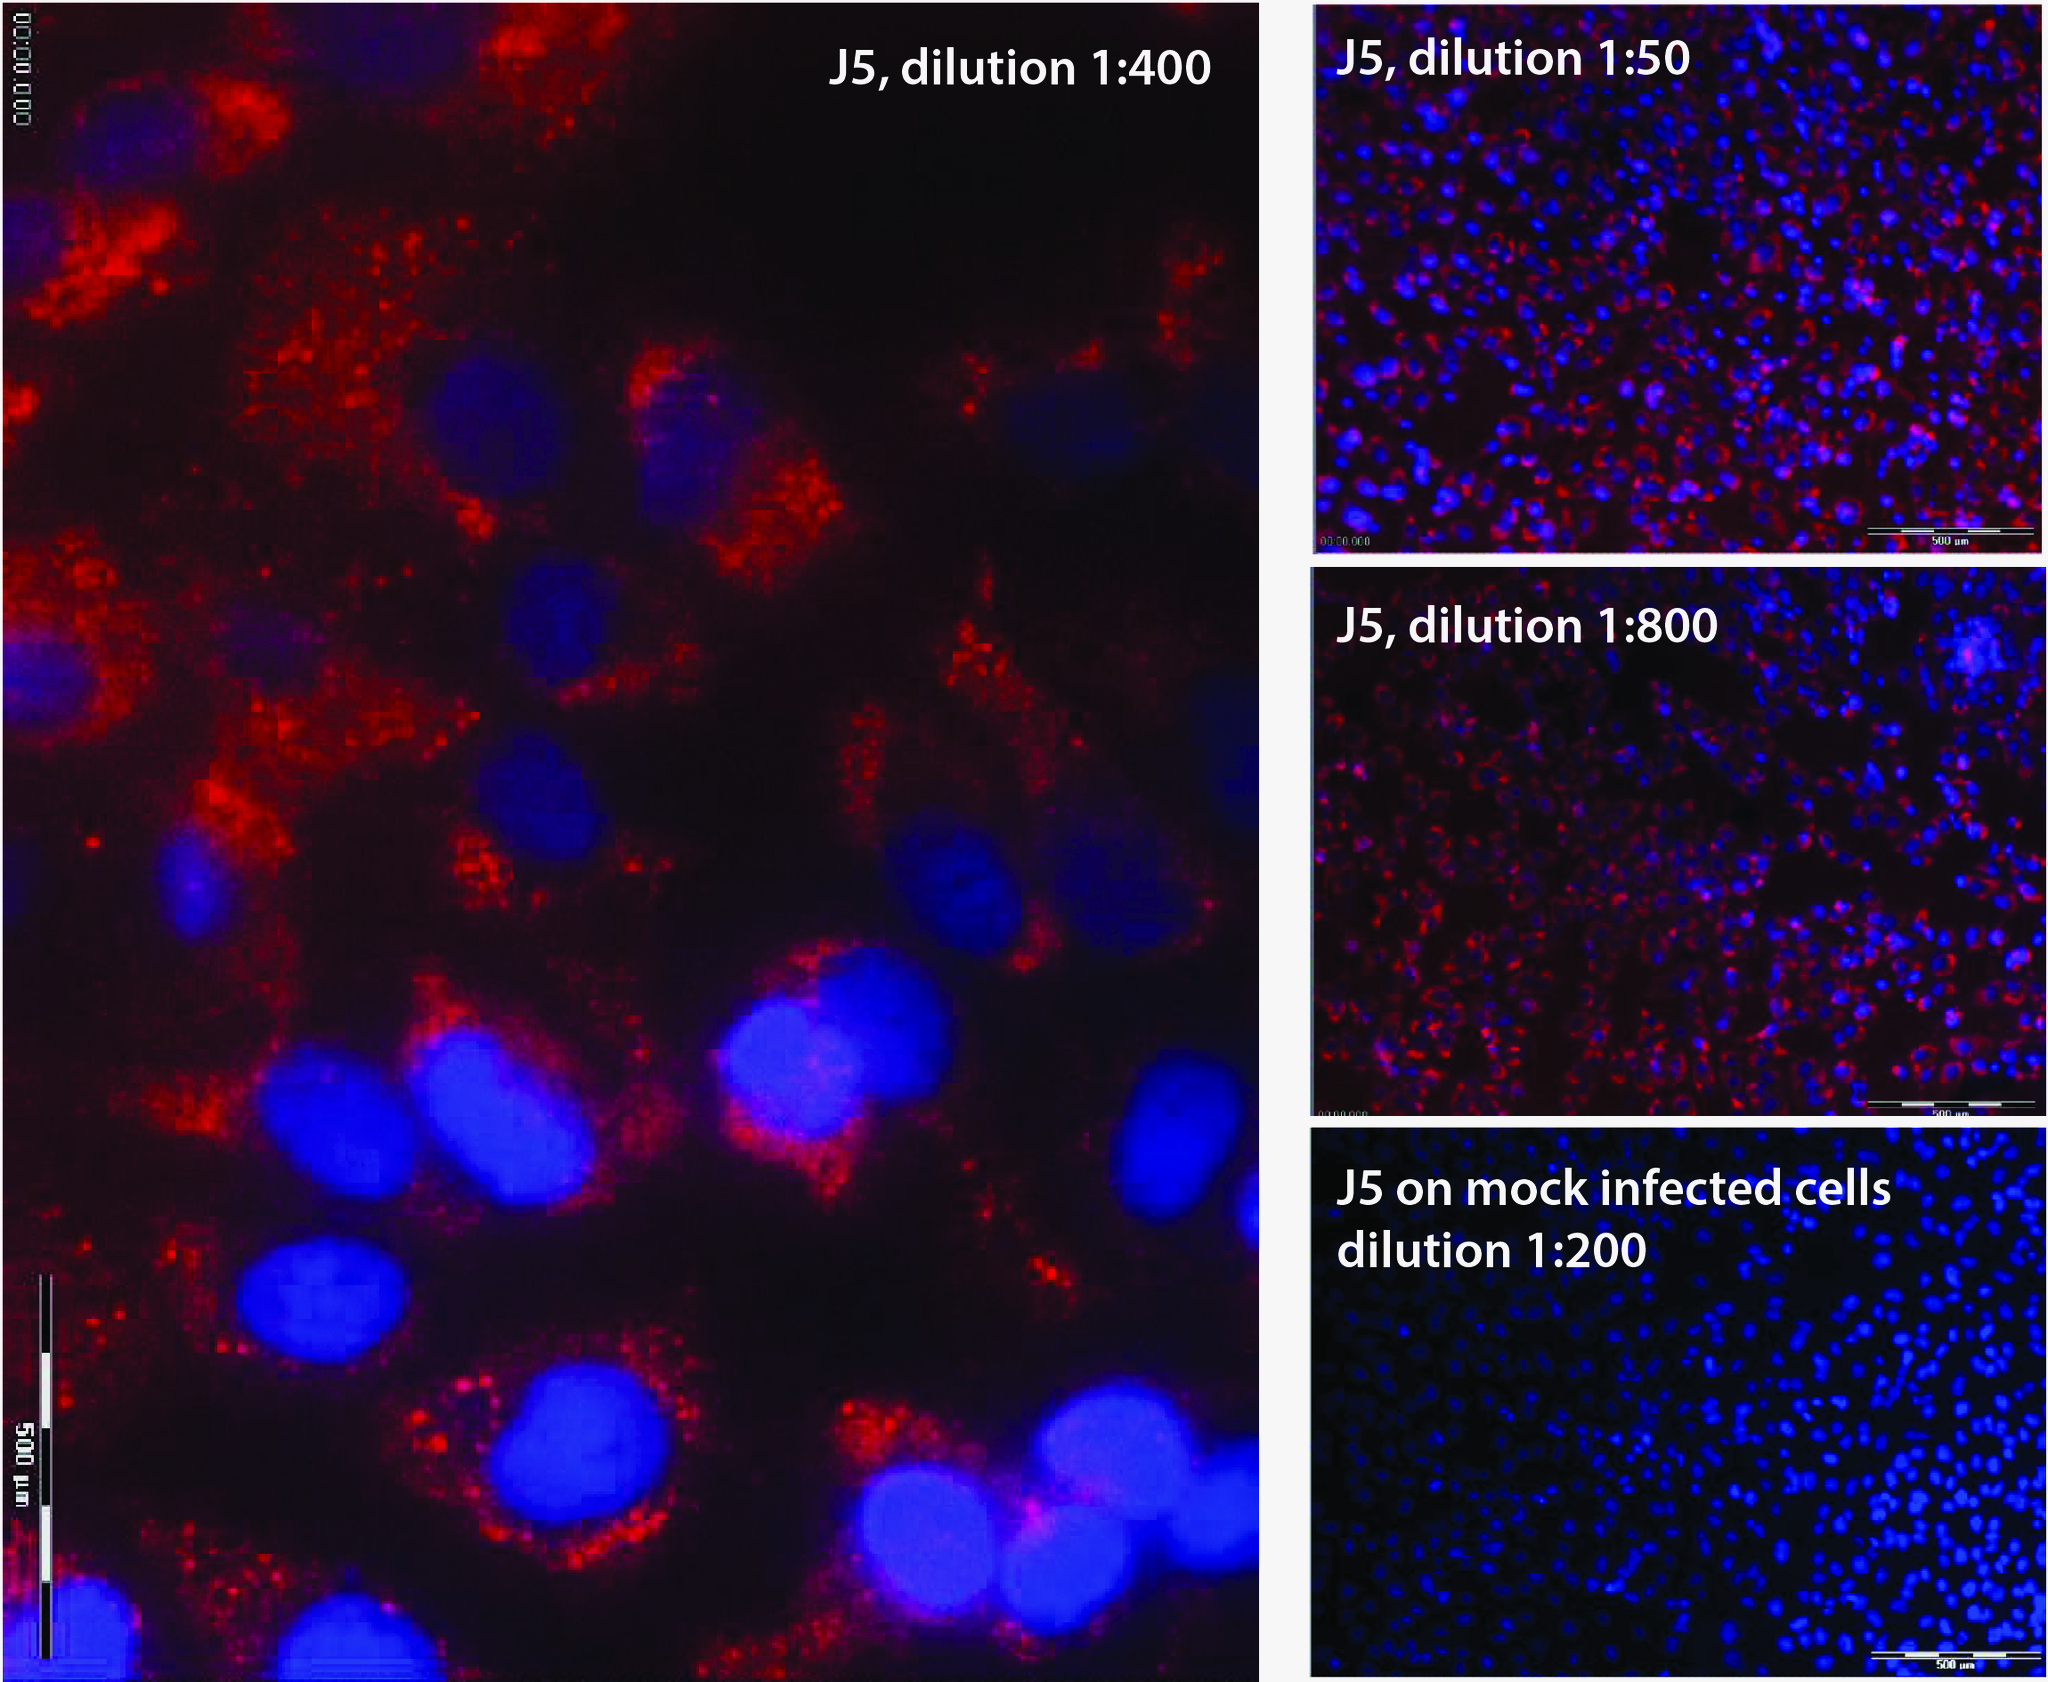 Figure 1. J5 detects dsRNA in Vero cells infected with ECMV. dsRNA is visualized with different dilutions of J5 and is not detectable in mock infected cells. Cells were fixed with 3% PFA for 30min at 2-8°C, permeabilized with 0.5% Triton-X 100 for 5min at room temperature and J5 was detected with Cy3-labelled goat anti-mouse secondary antibody. red: dsRNA, blue: DAPI nuclear stain. Images courtesy of Friedemann Weber, Justus-Liebig-University Giessen, Germany.